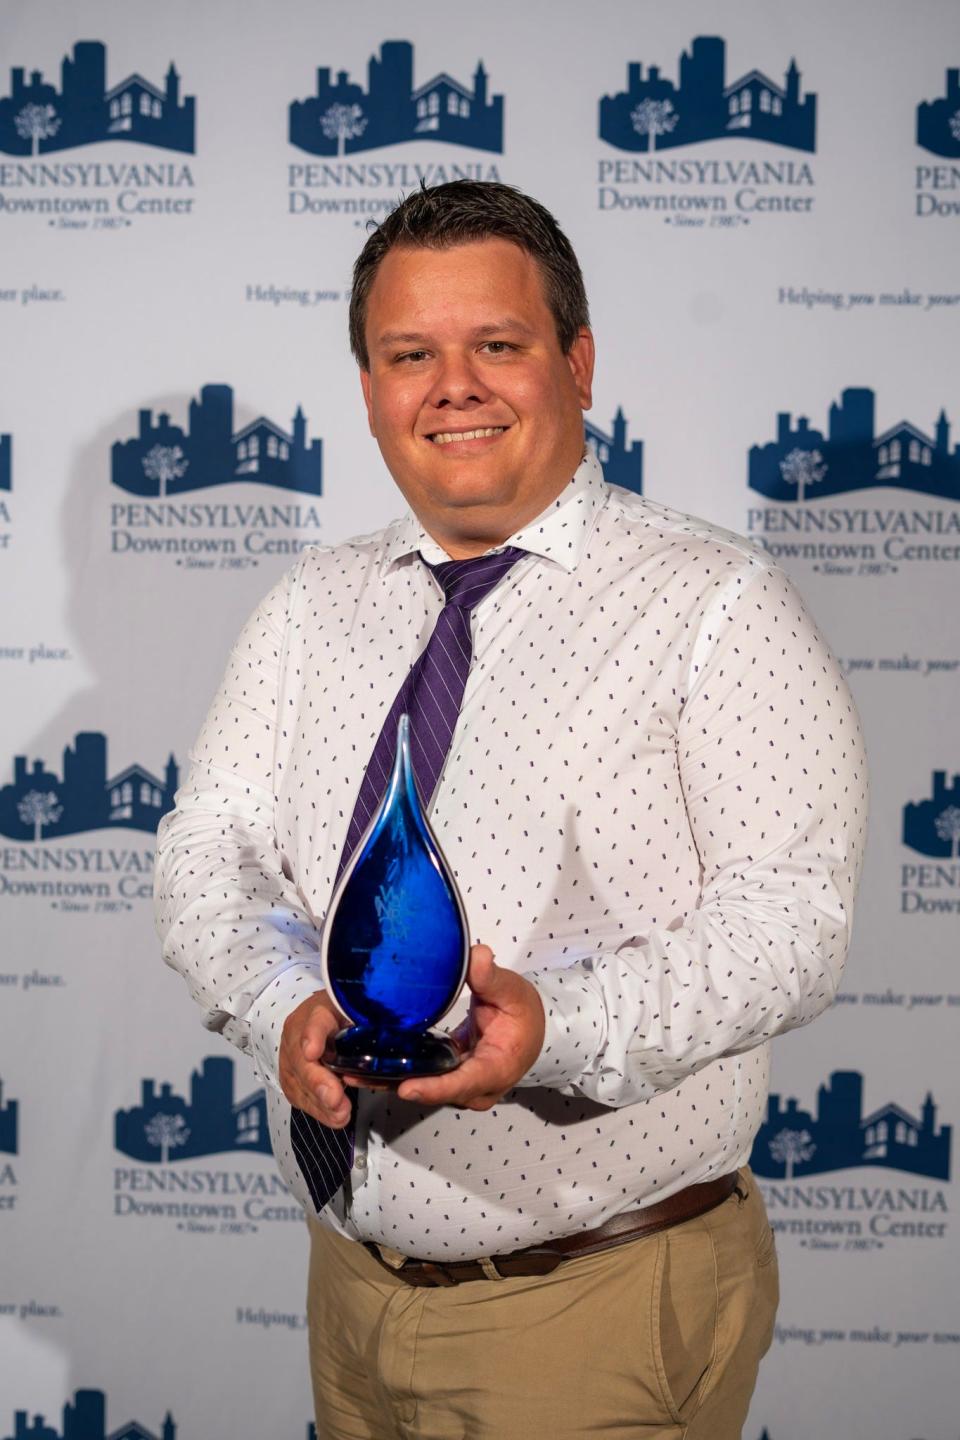 Sam Thrush, president of Downtown Chambersburg Inc., holds the Townie Award for Special Events that his organization won at the recent Pennsylvania Downtown Council's annual conference.